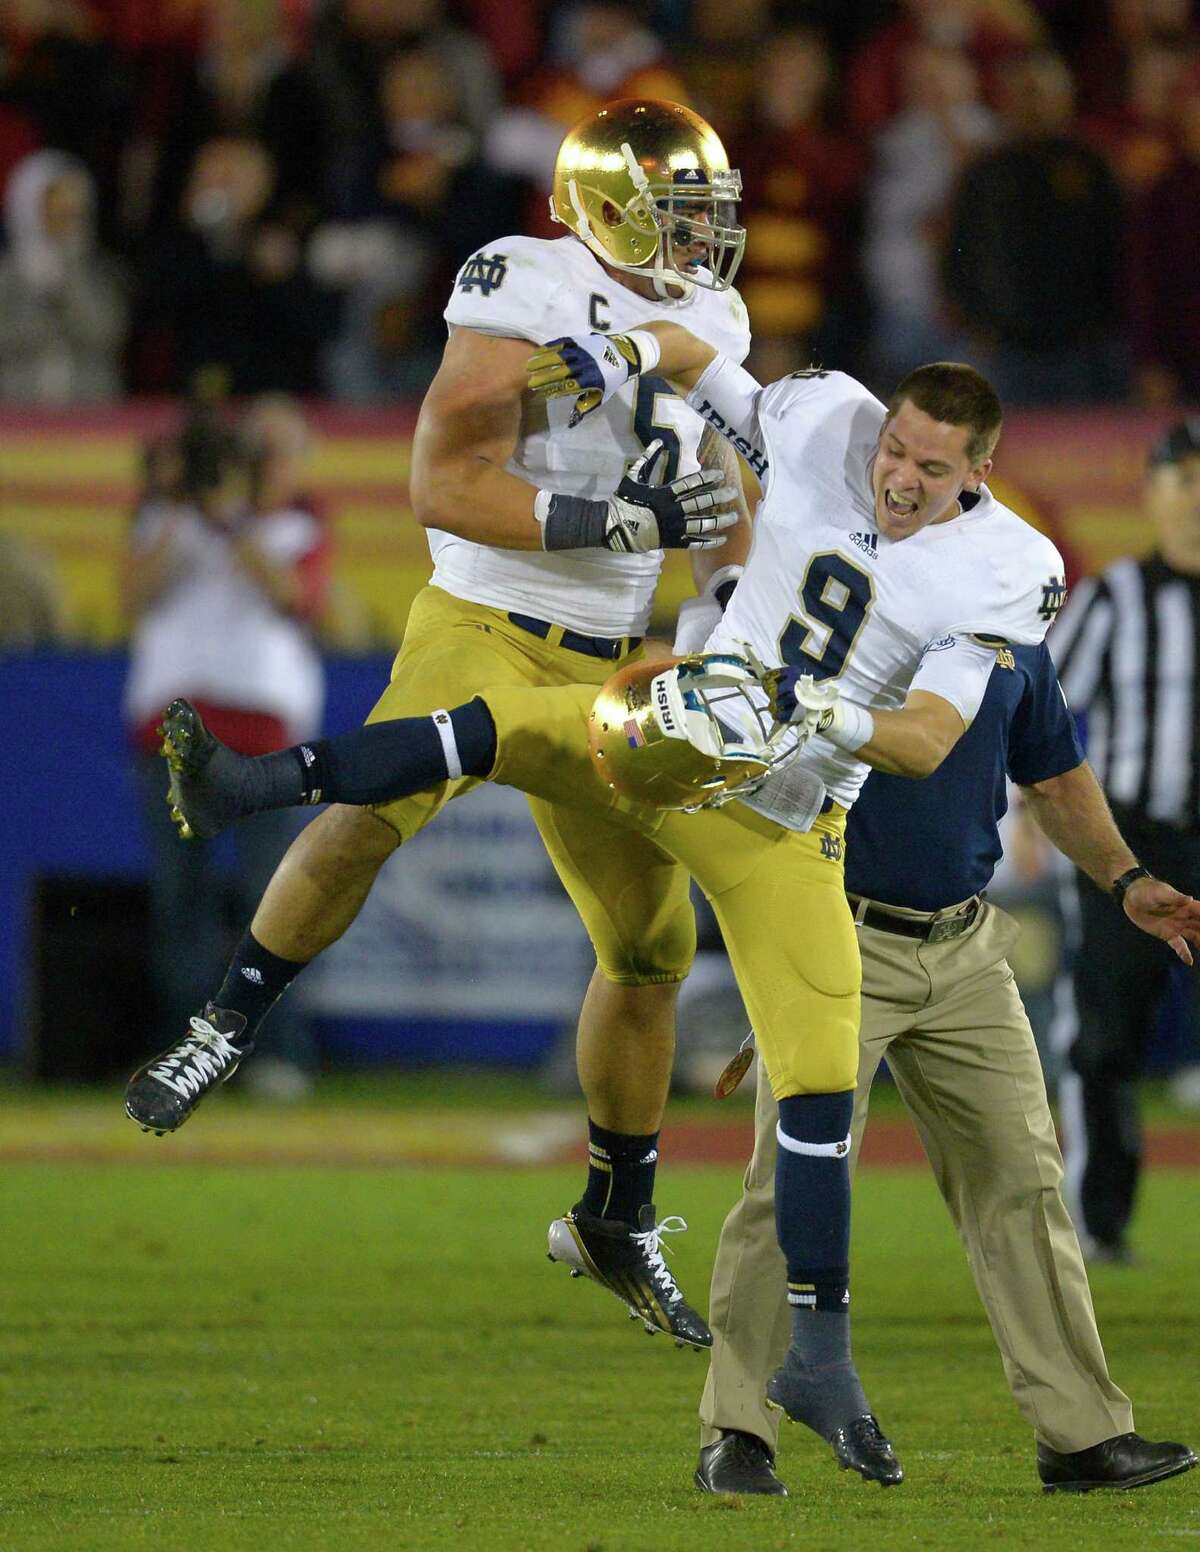 BEST: BCS national championship game (Alabama vs. Notre Dame, Jan. 7) -- What could be better than two tradition-steeped rivals playing for all of the credit cards, as Brent Musburger will say? Notre Dame linebacker Manti Te'o (left) celebrates with Notre Dame wide receiver Robby Toma in the closing second of their victory over USC on Nov. 24, 2012. Mark J. Terrill/Associated Press